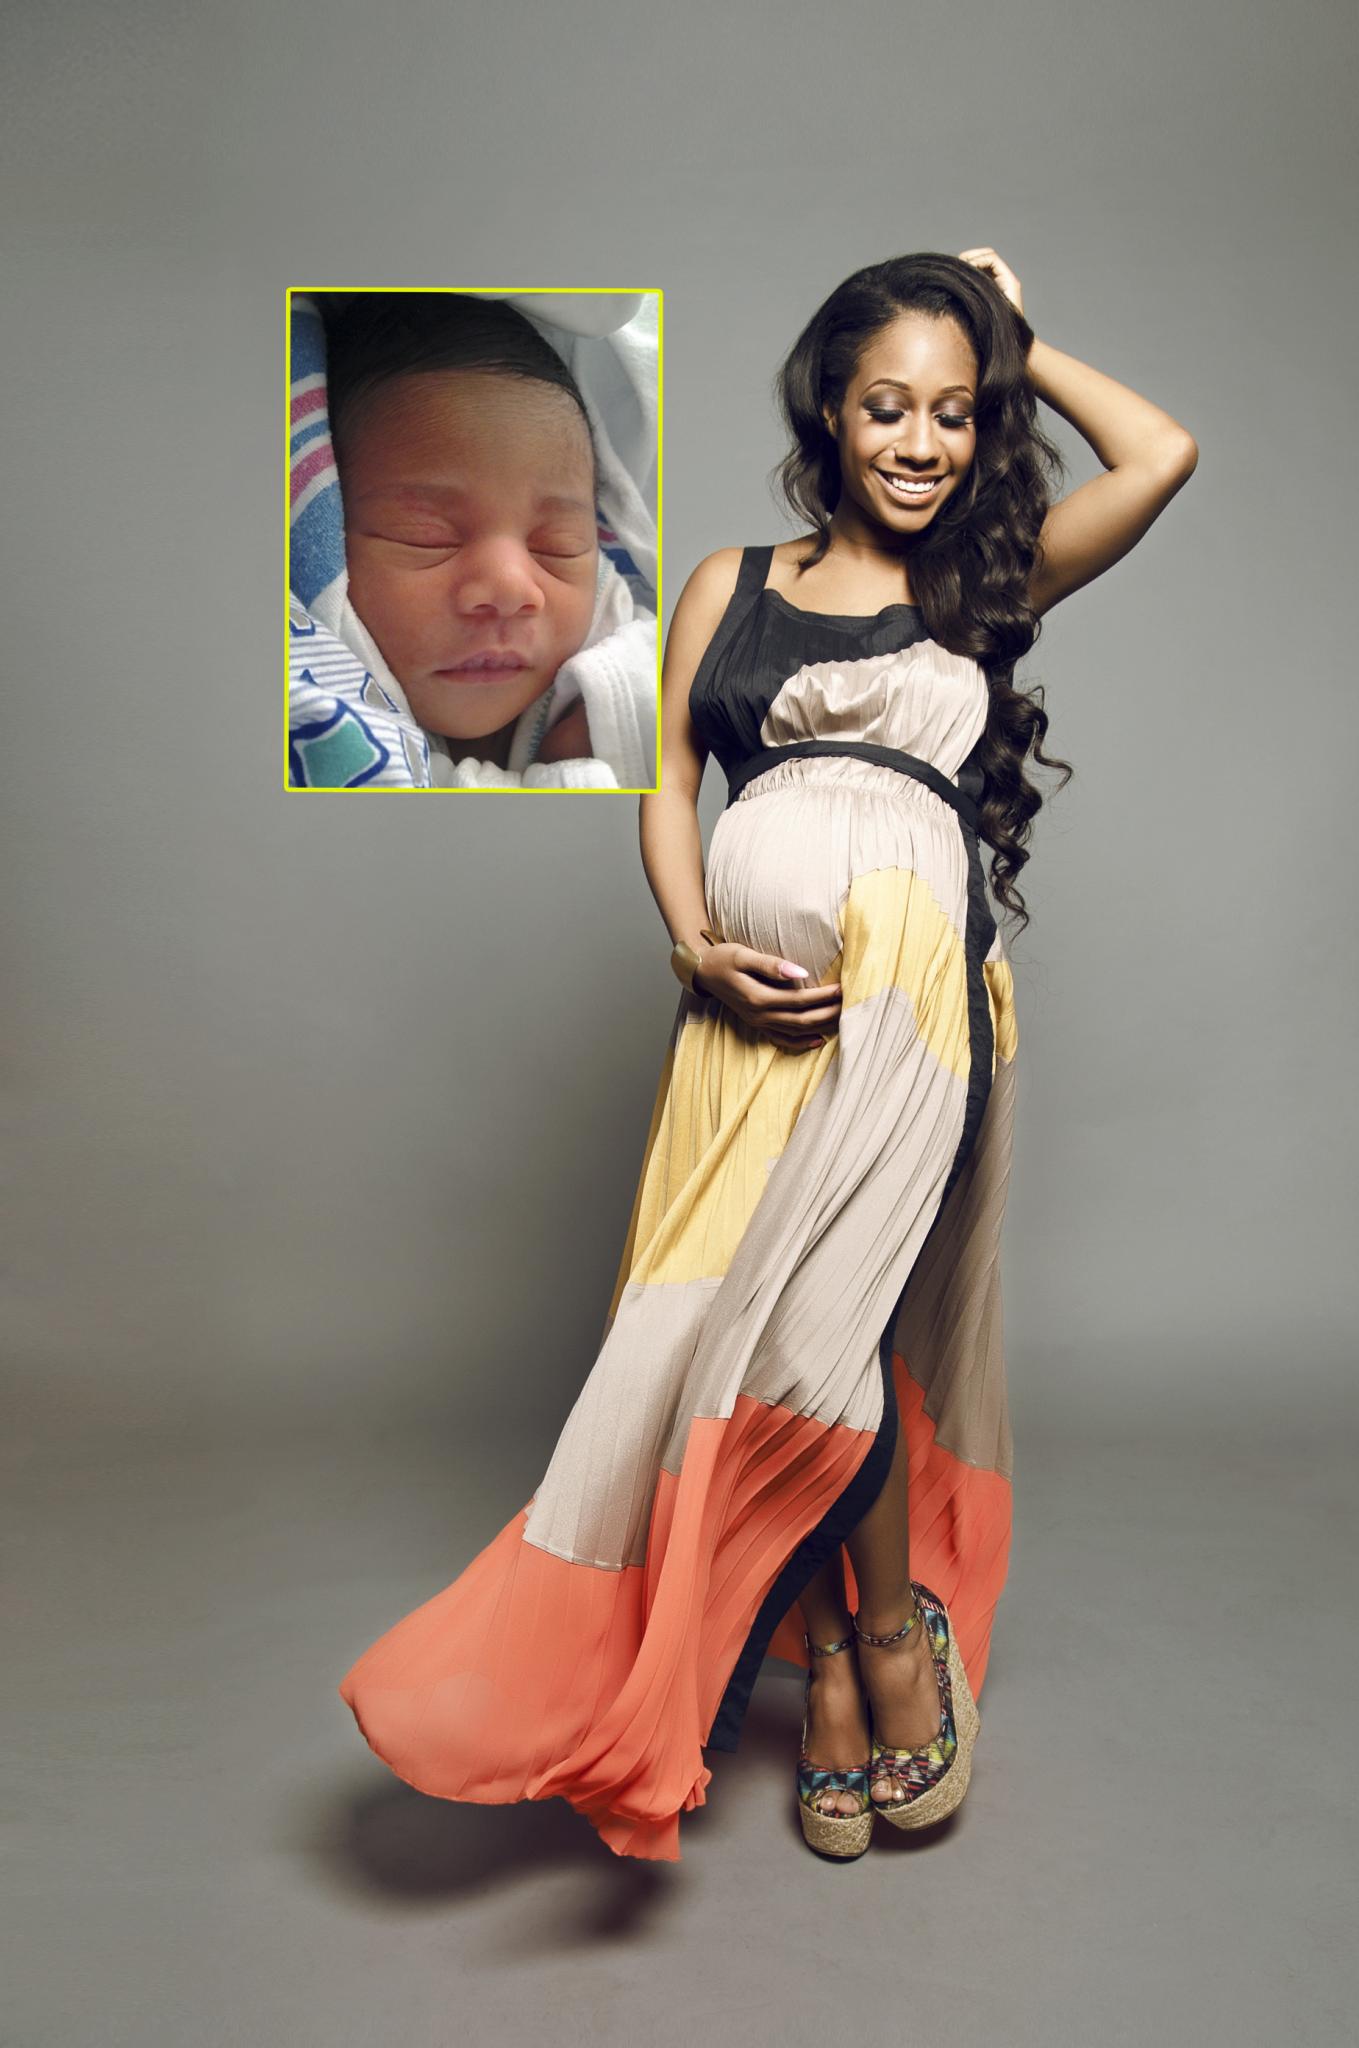 Tiffany Evans Shares First Photo of Her Baby Girl